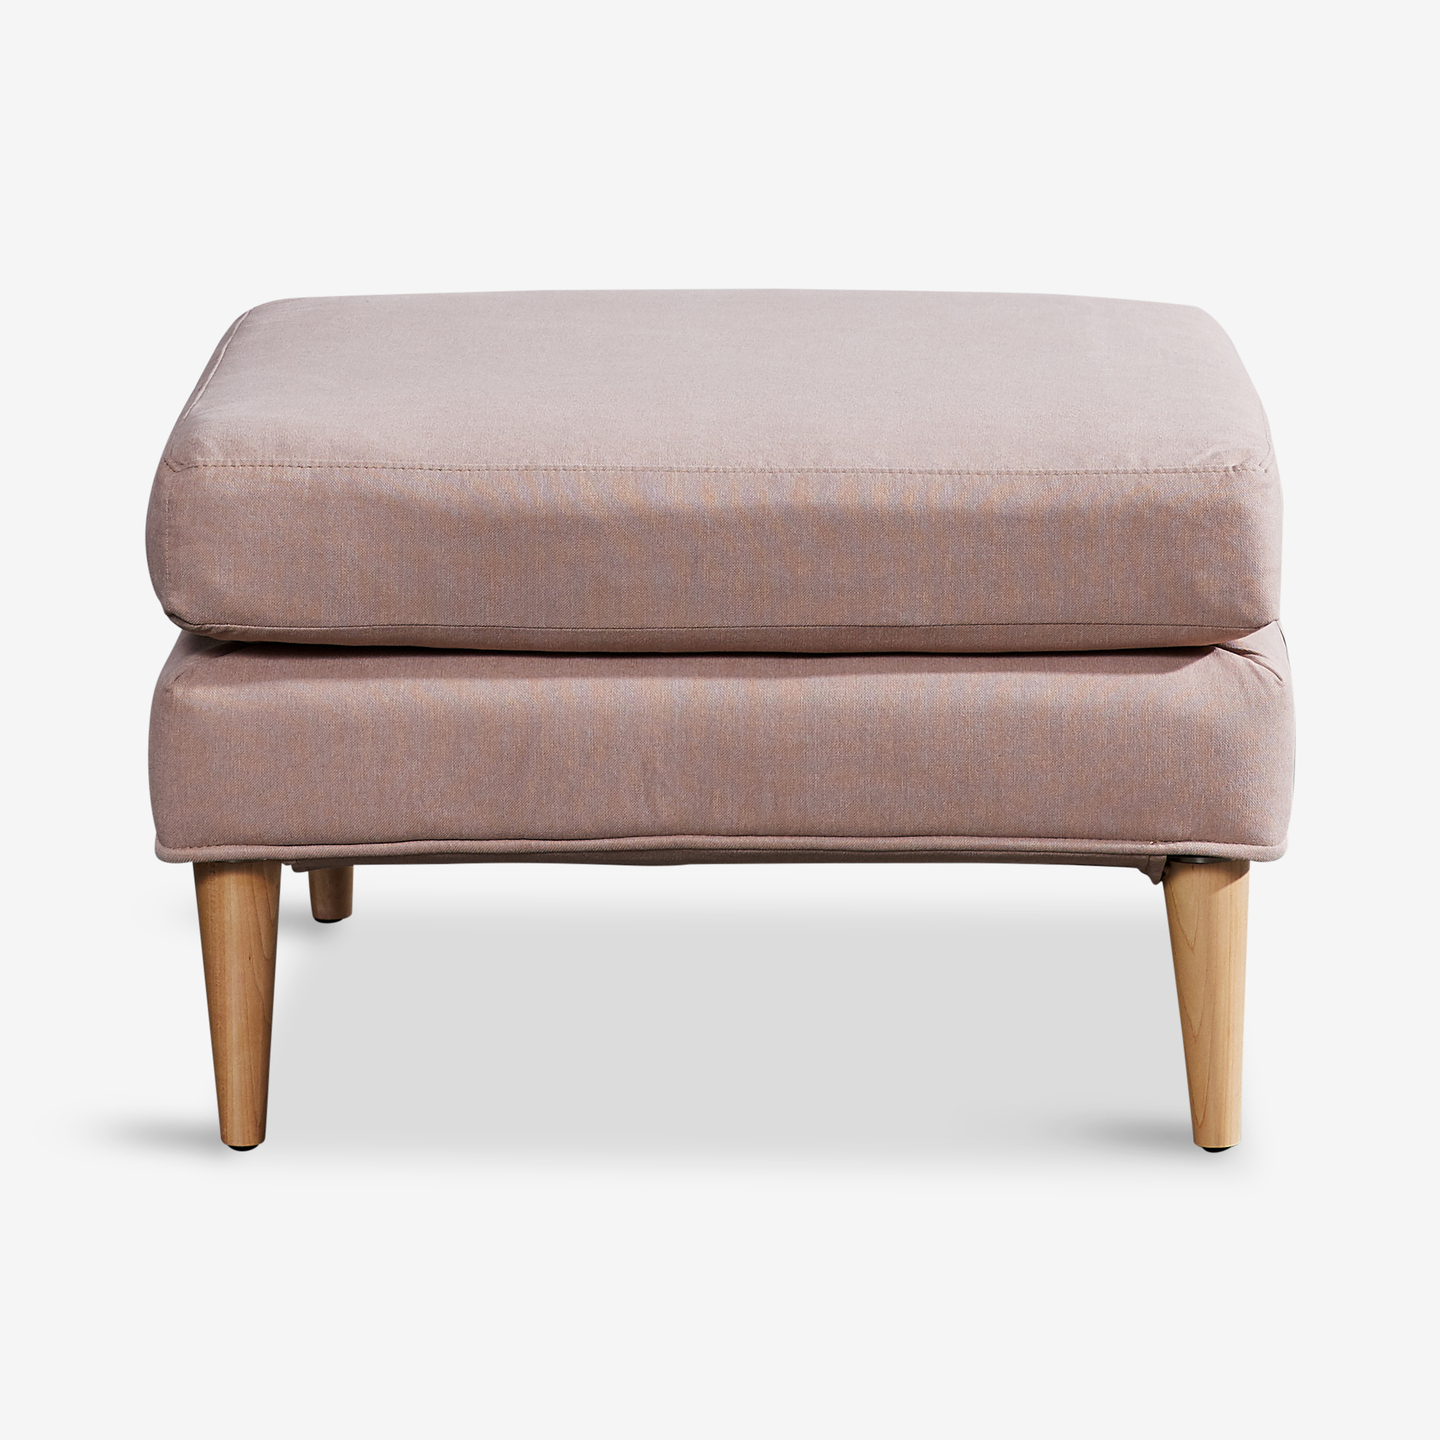 428_Campaign-Ottoman-Dusty-Rose_Flat-Front 2020